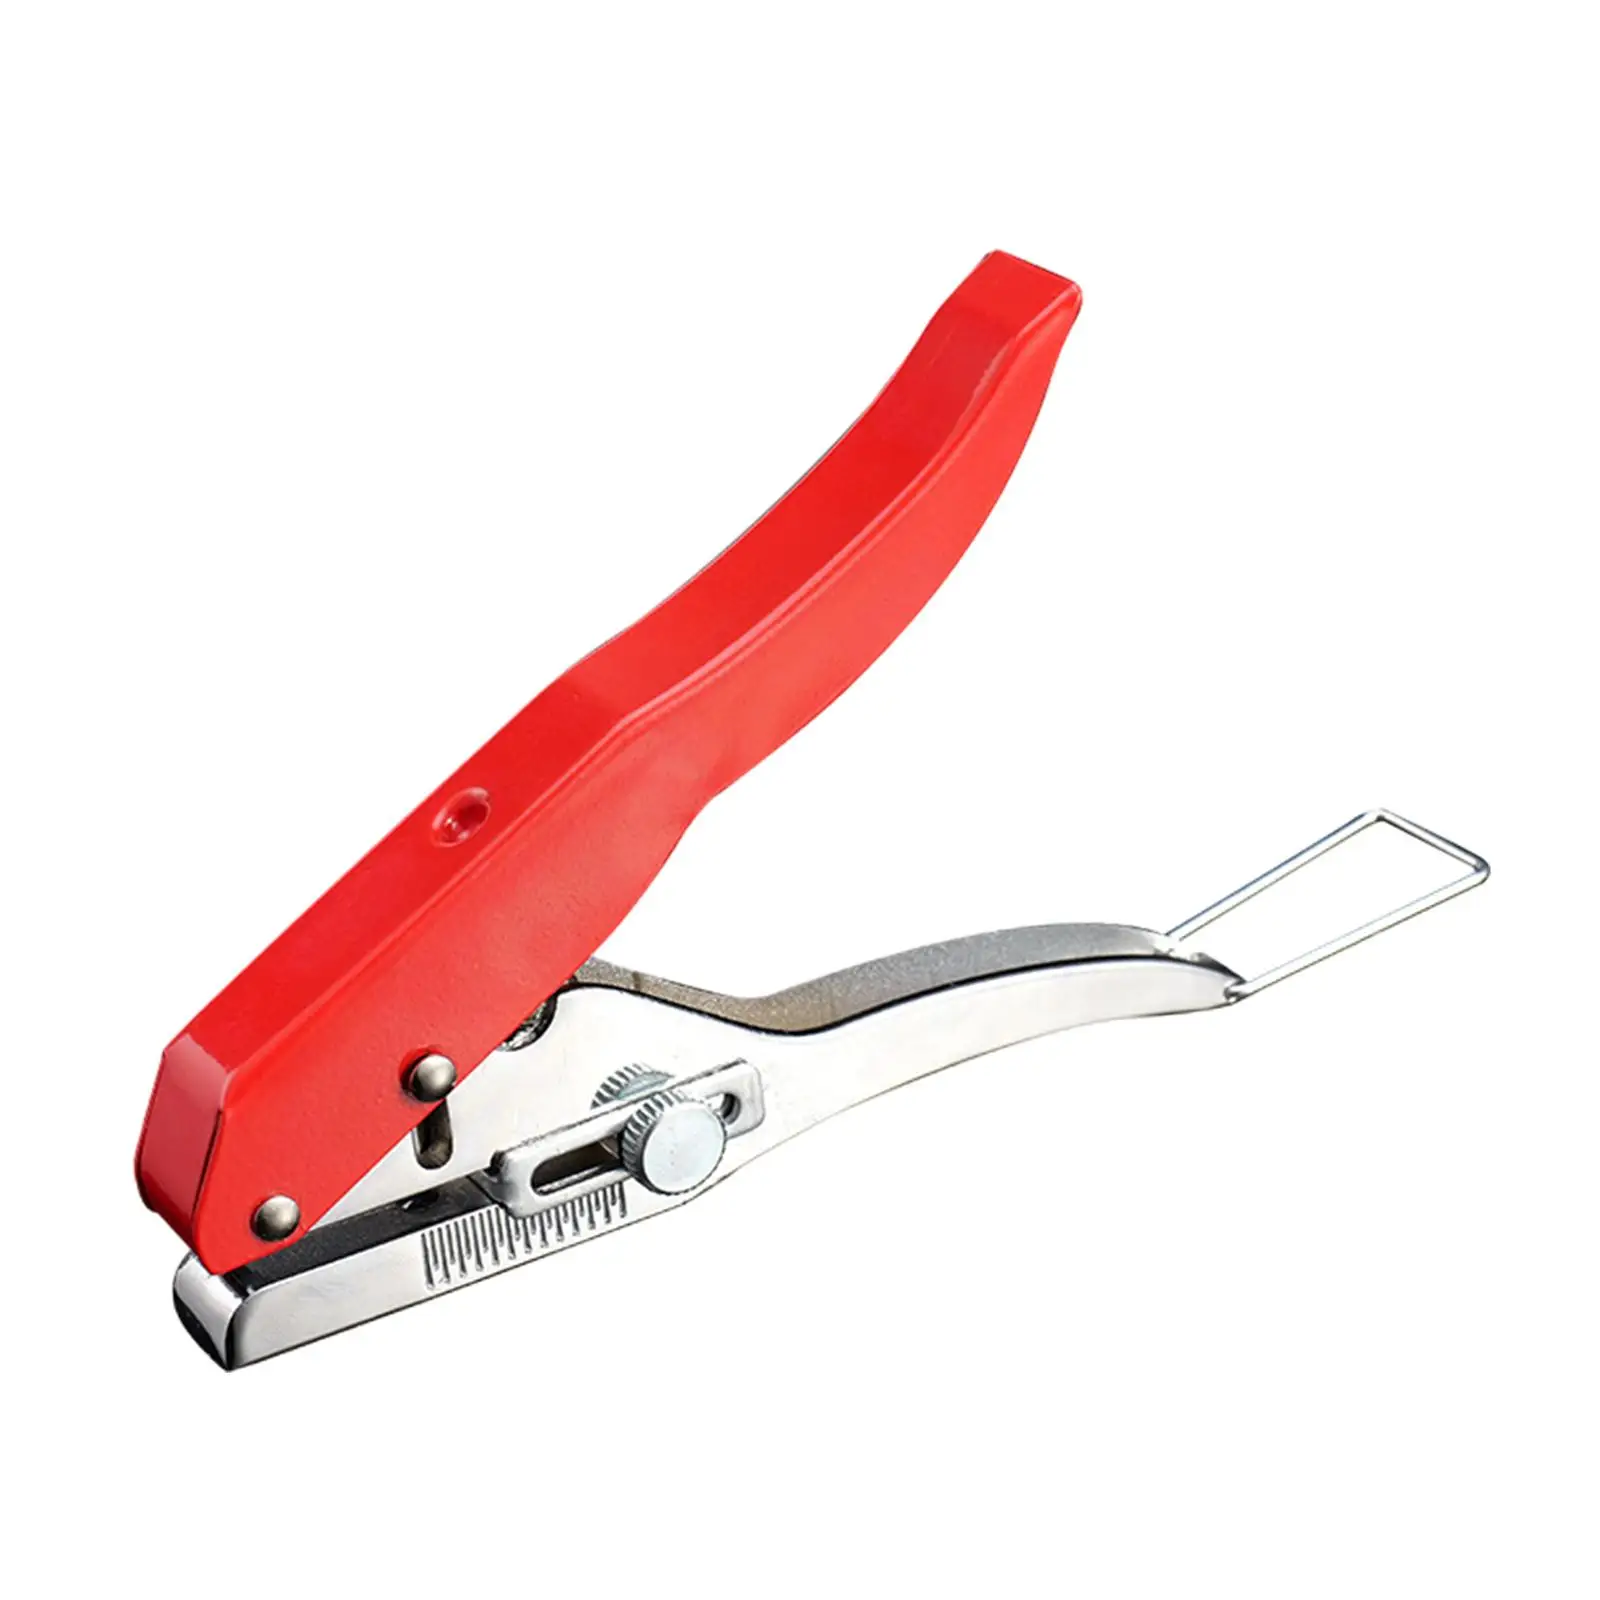 Single Hole Punch Paper Punch with Scale Handheld Edge Banding Punching Pliers for Photo Cardboard Label Paper Card Craft Paper